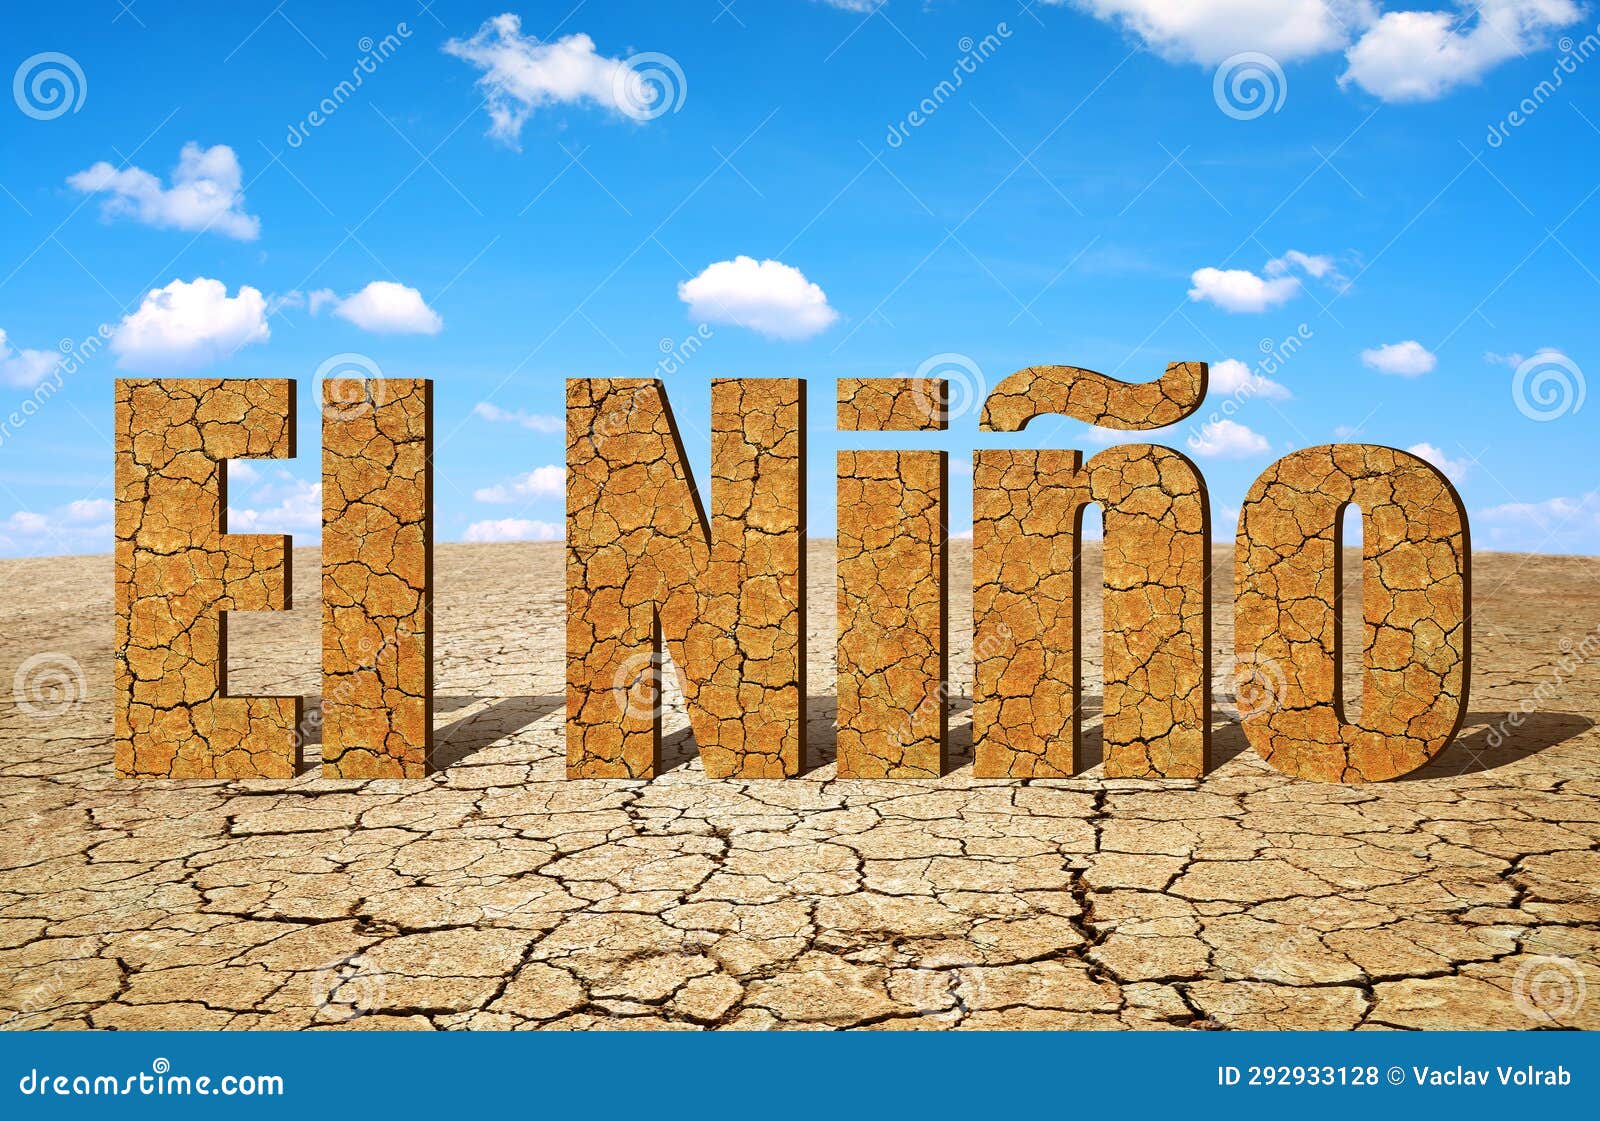 landscape with dry cracked soil and el niÃ±o text.